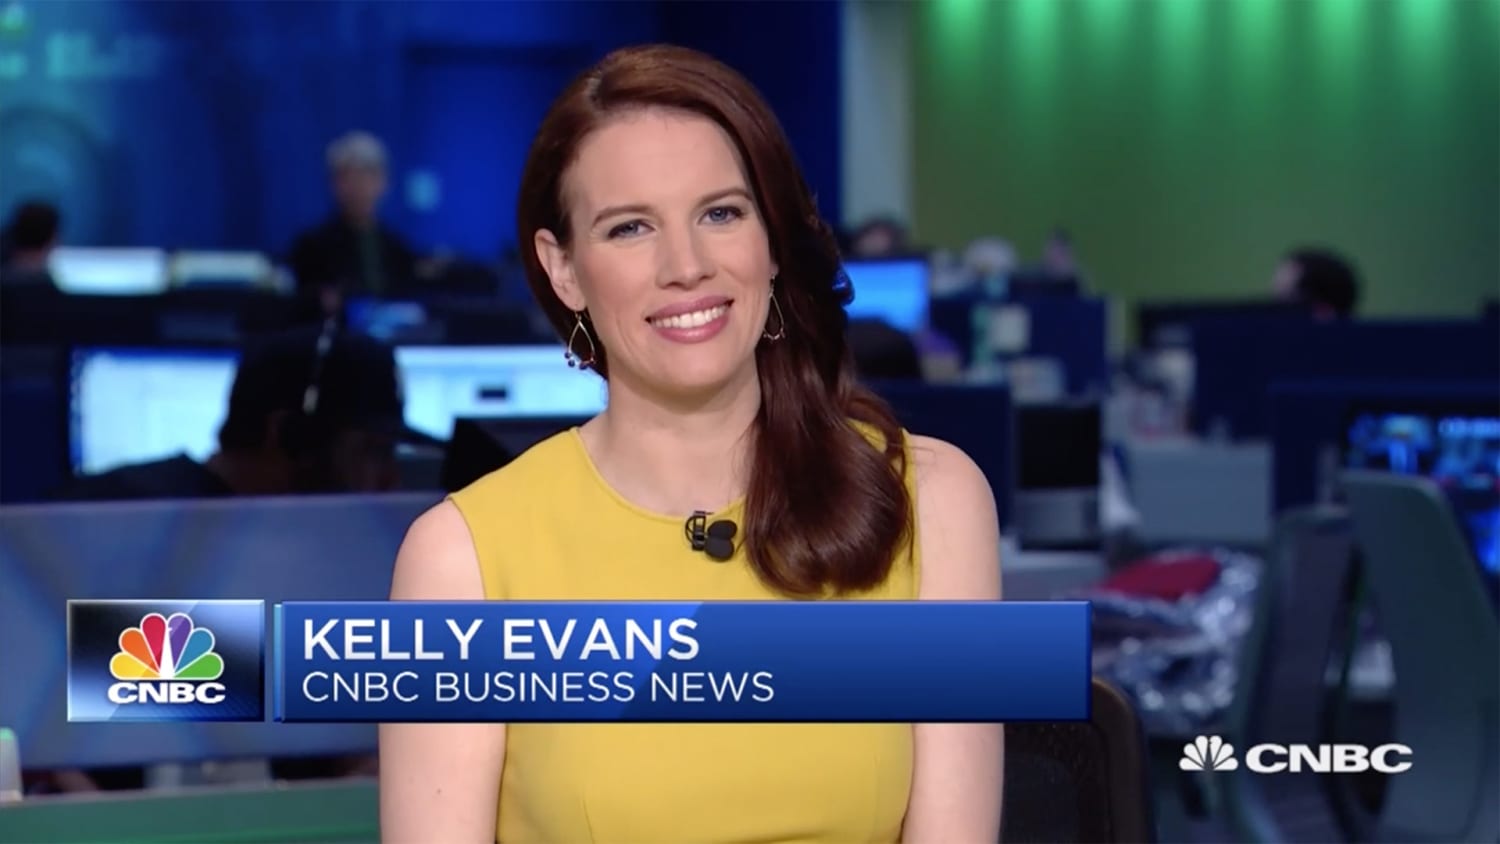 Kelly evans is one of the prominent tv anchors, she has an estimated net wo...